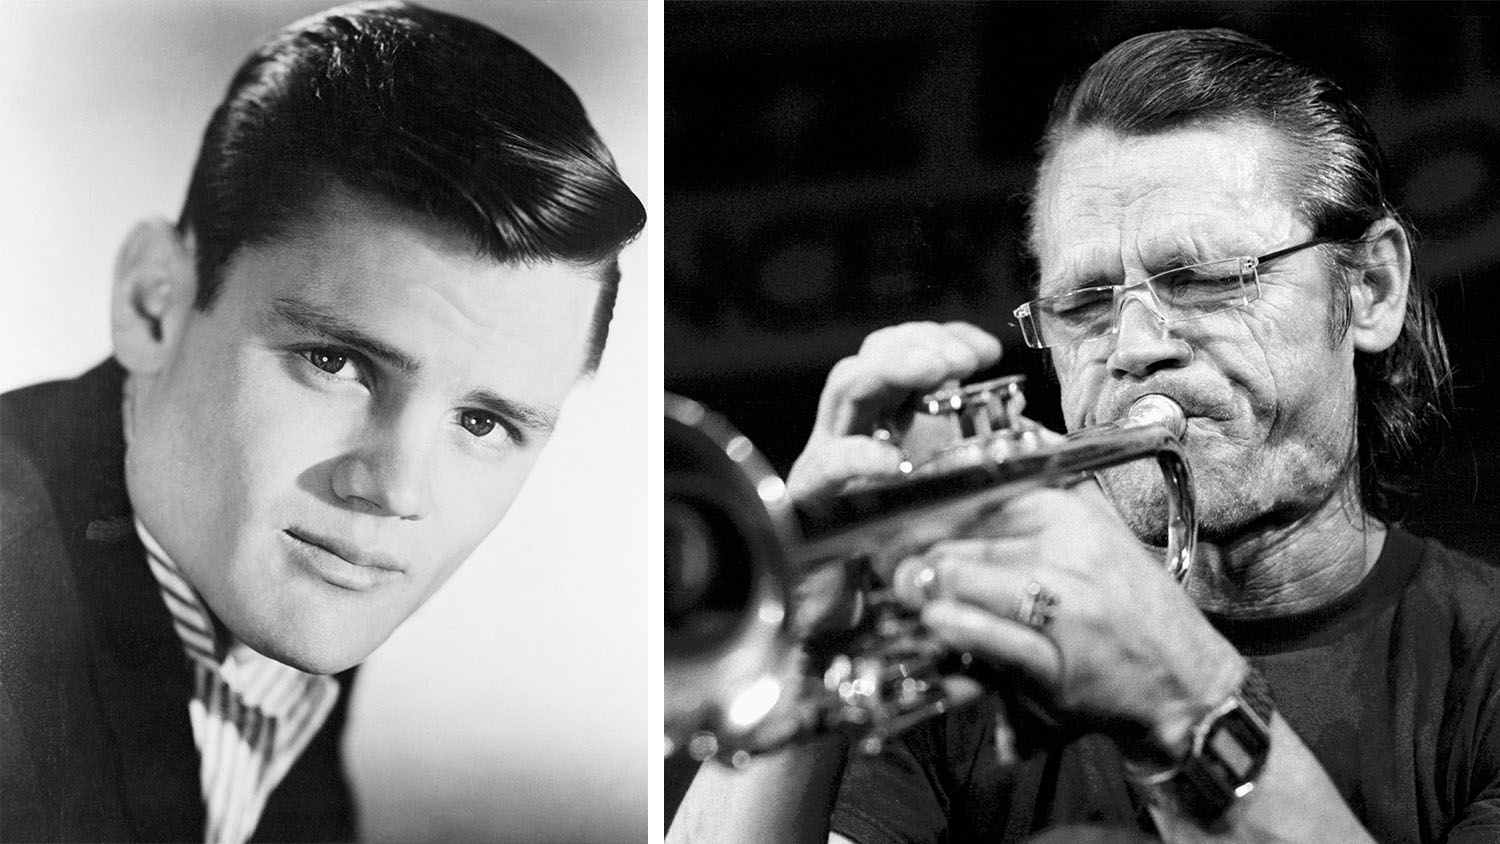 Chet Baker S Career Timeline 11 Moments That Defined The Prince Of Cool